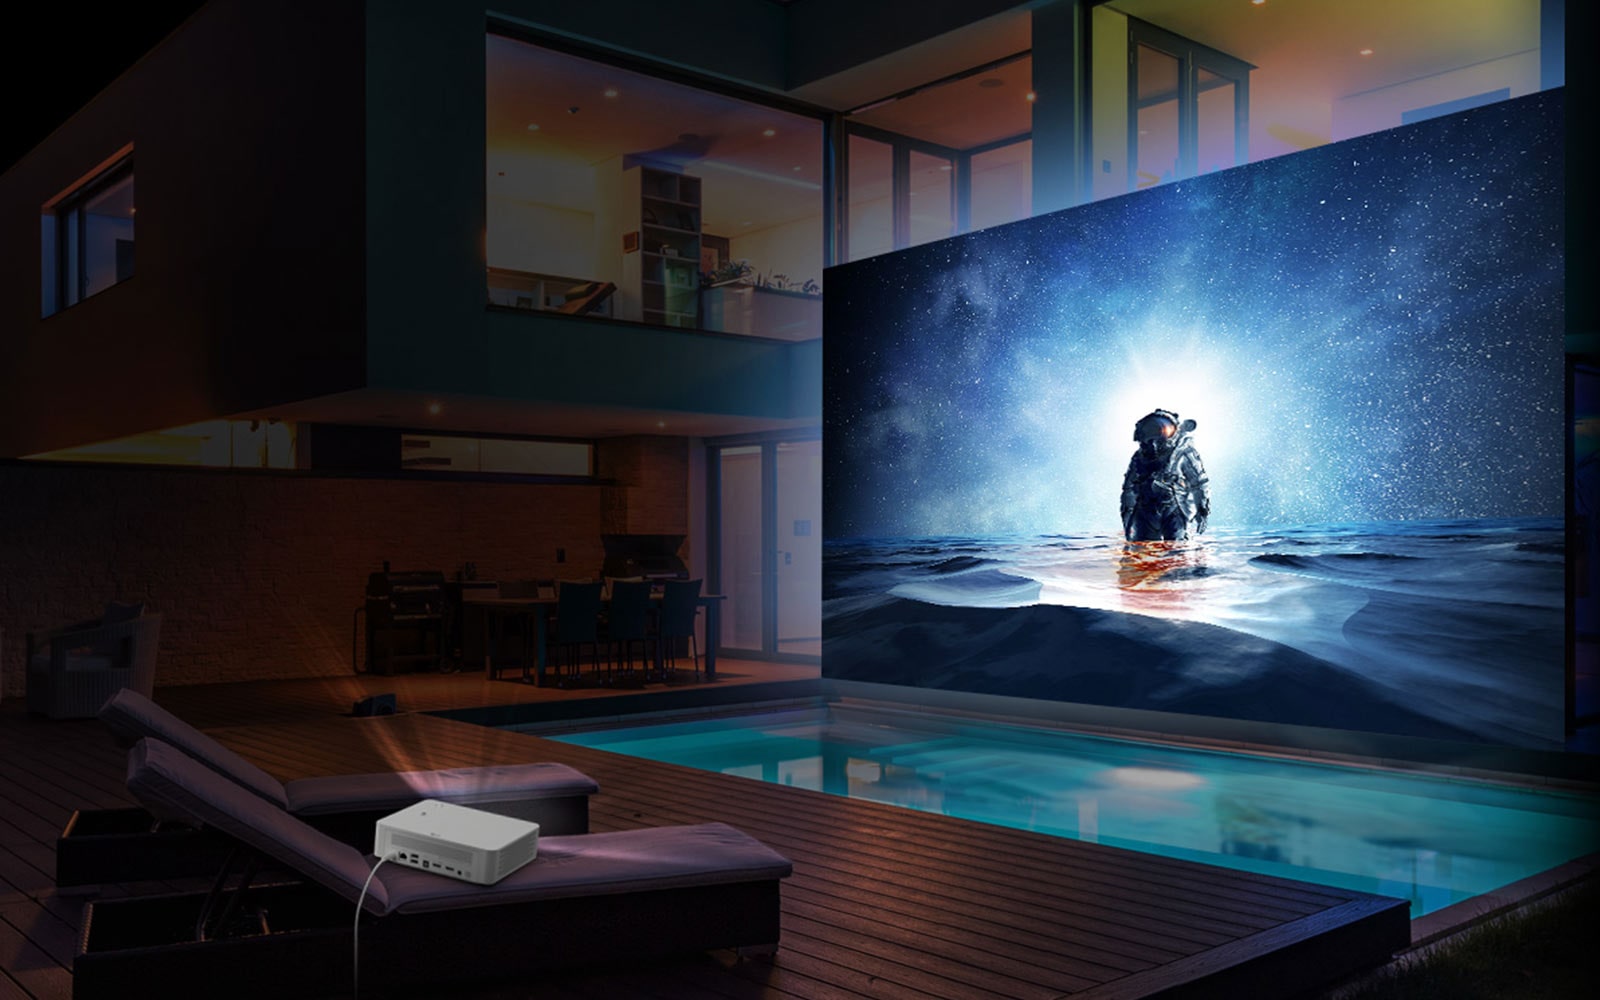 LG CineBeam projector to enjoy in the pool